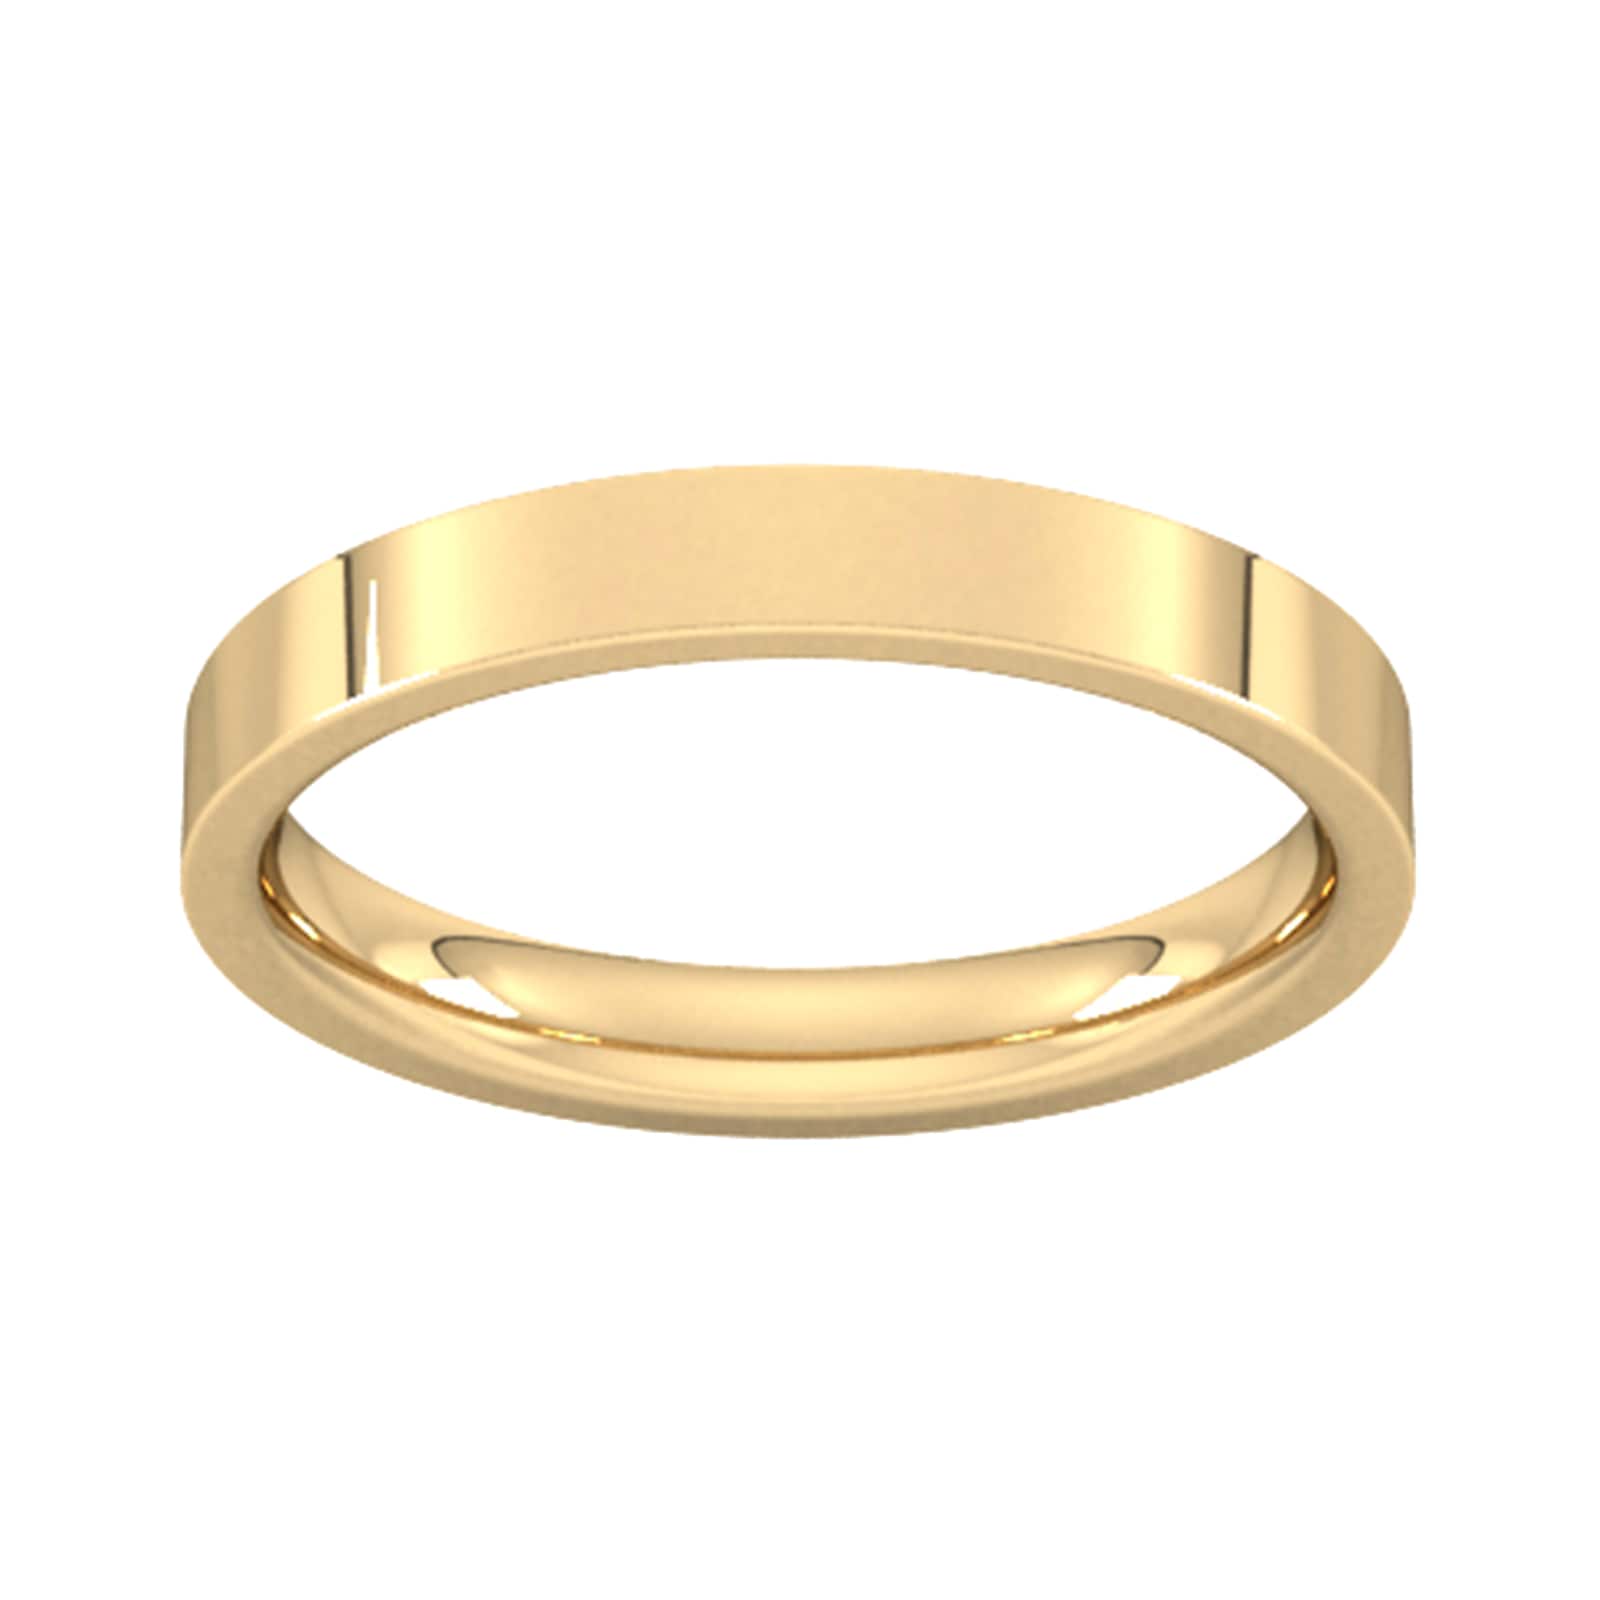 3mm Flat Court Heavy Wedding Ring In 18 Carat Yellow Gold - Ring Size O